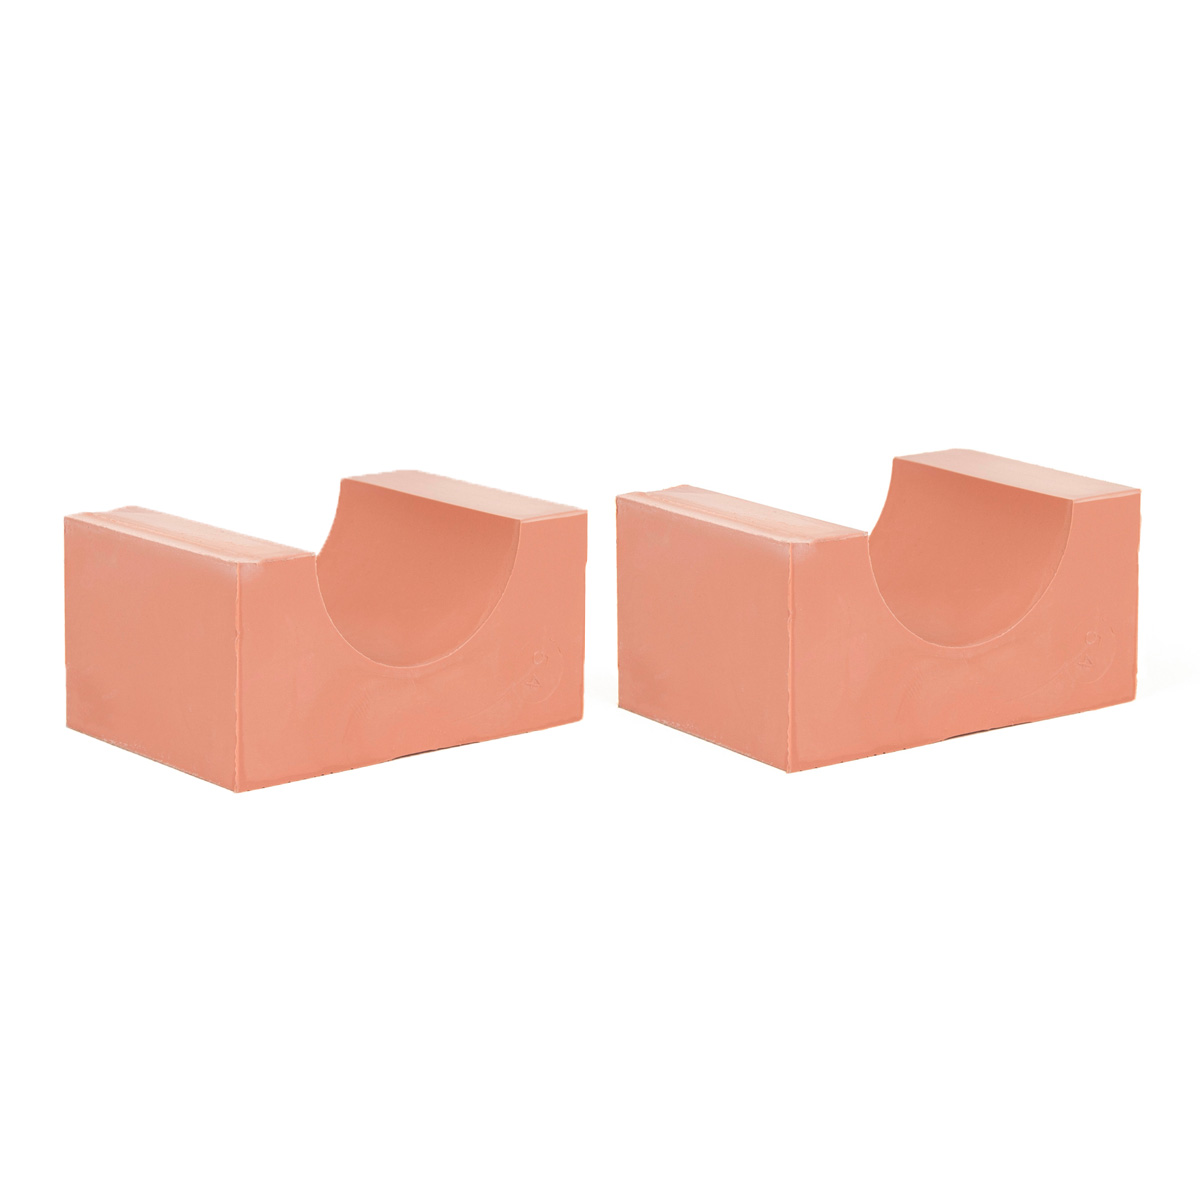 90-54*2 Set of 2 half insert block lycron, 90-54 for cable/pipe diam. 53.5-55.5mm